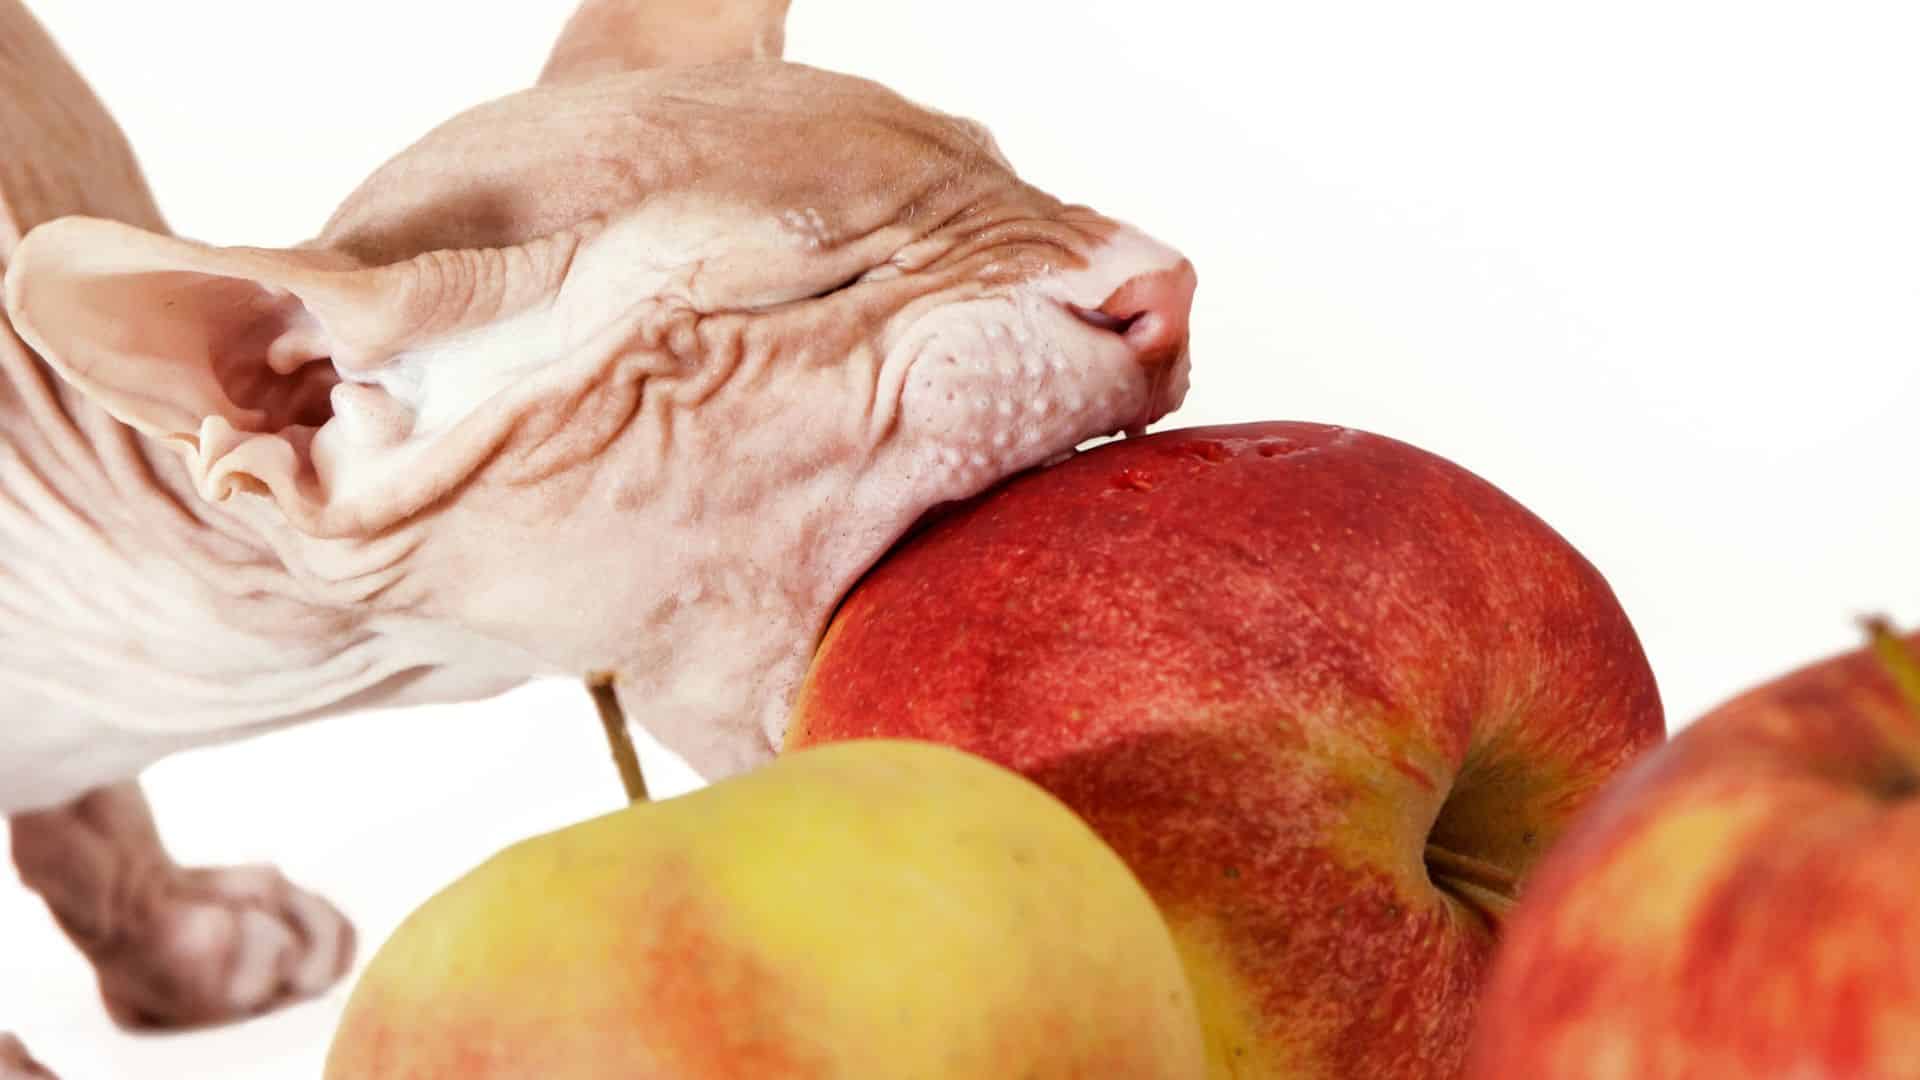 A cat eats whole apples and gets all the nutrients